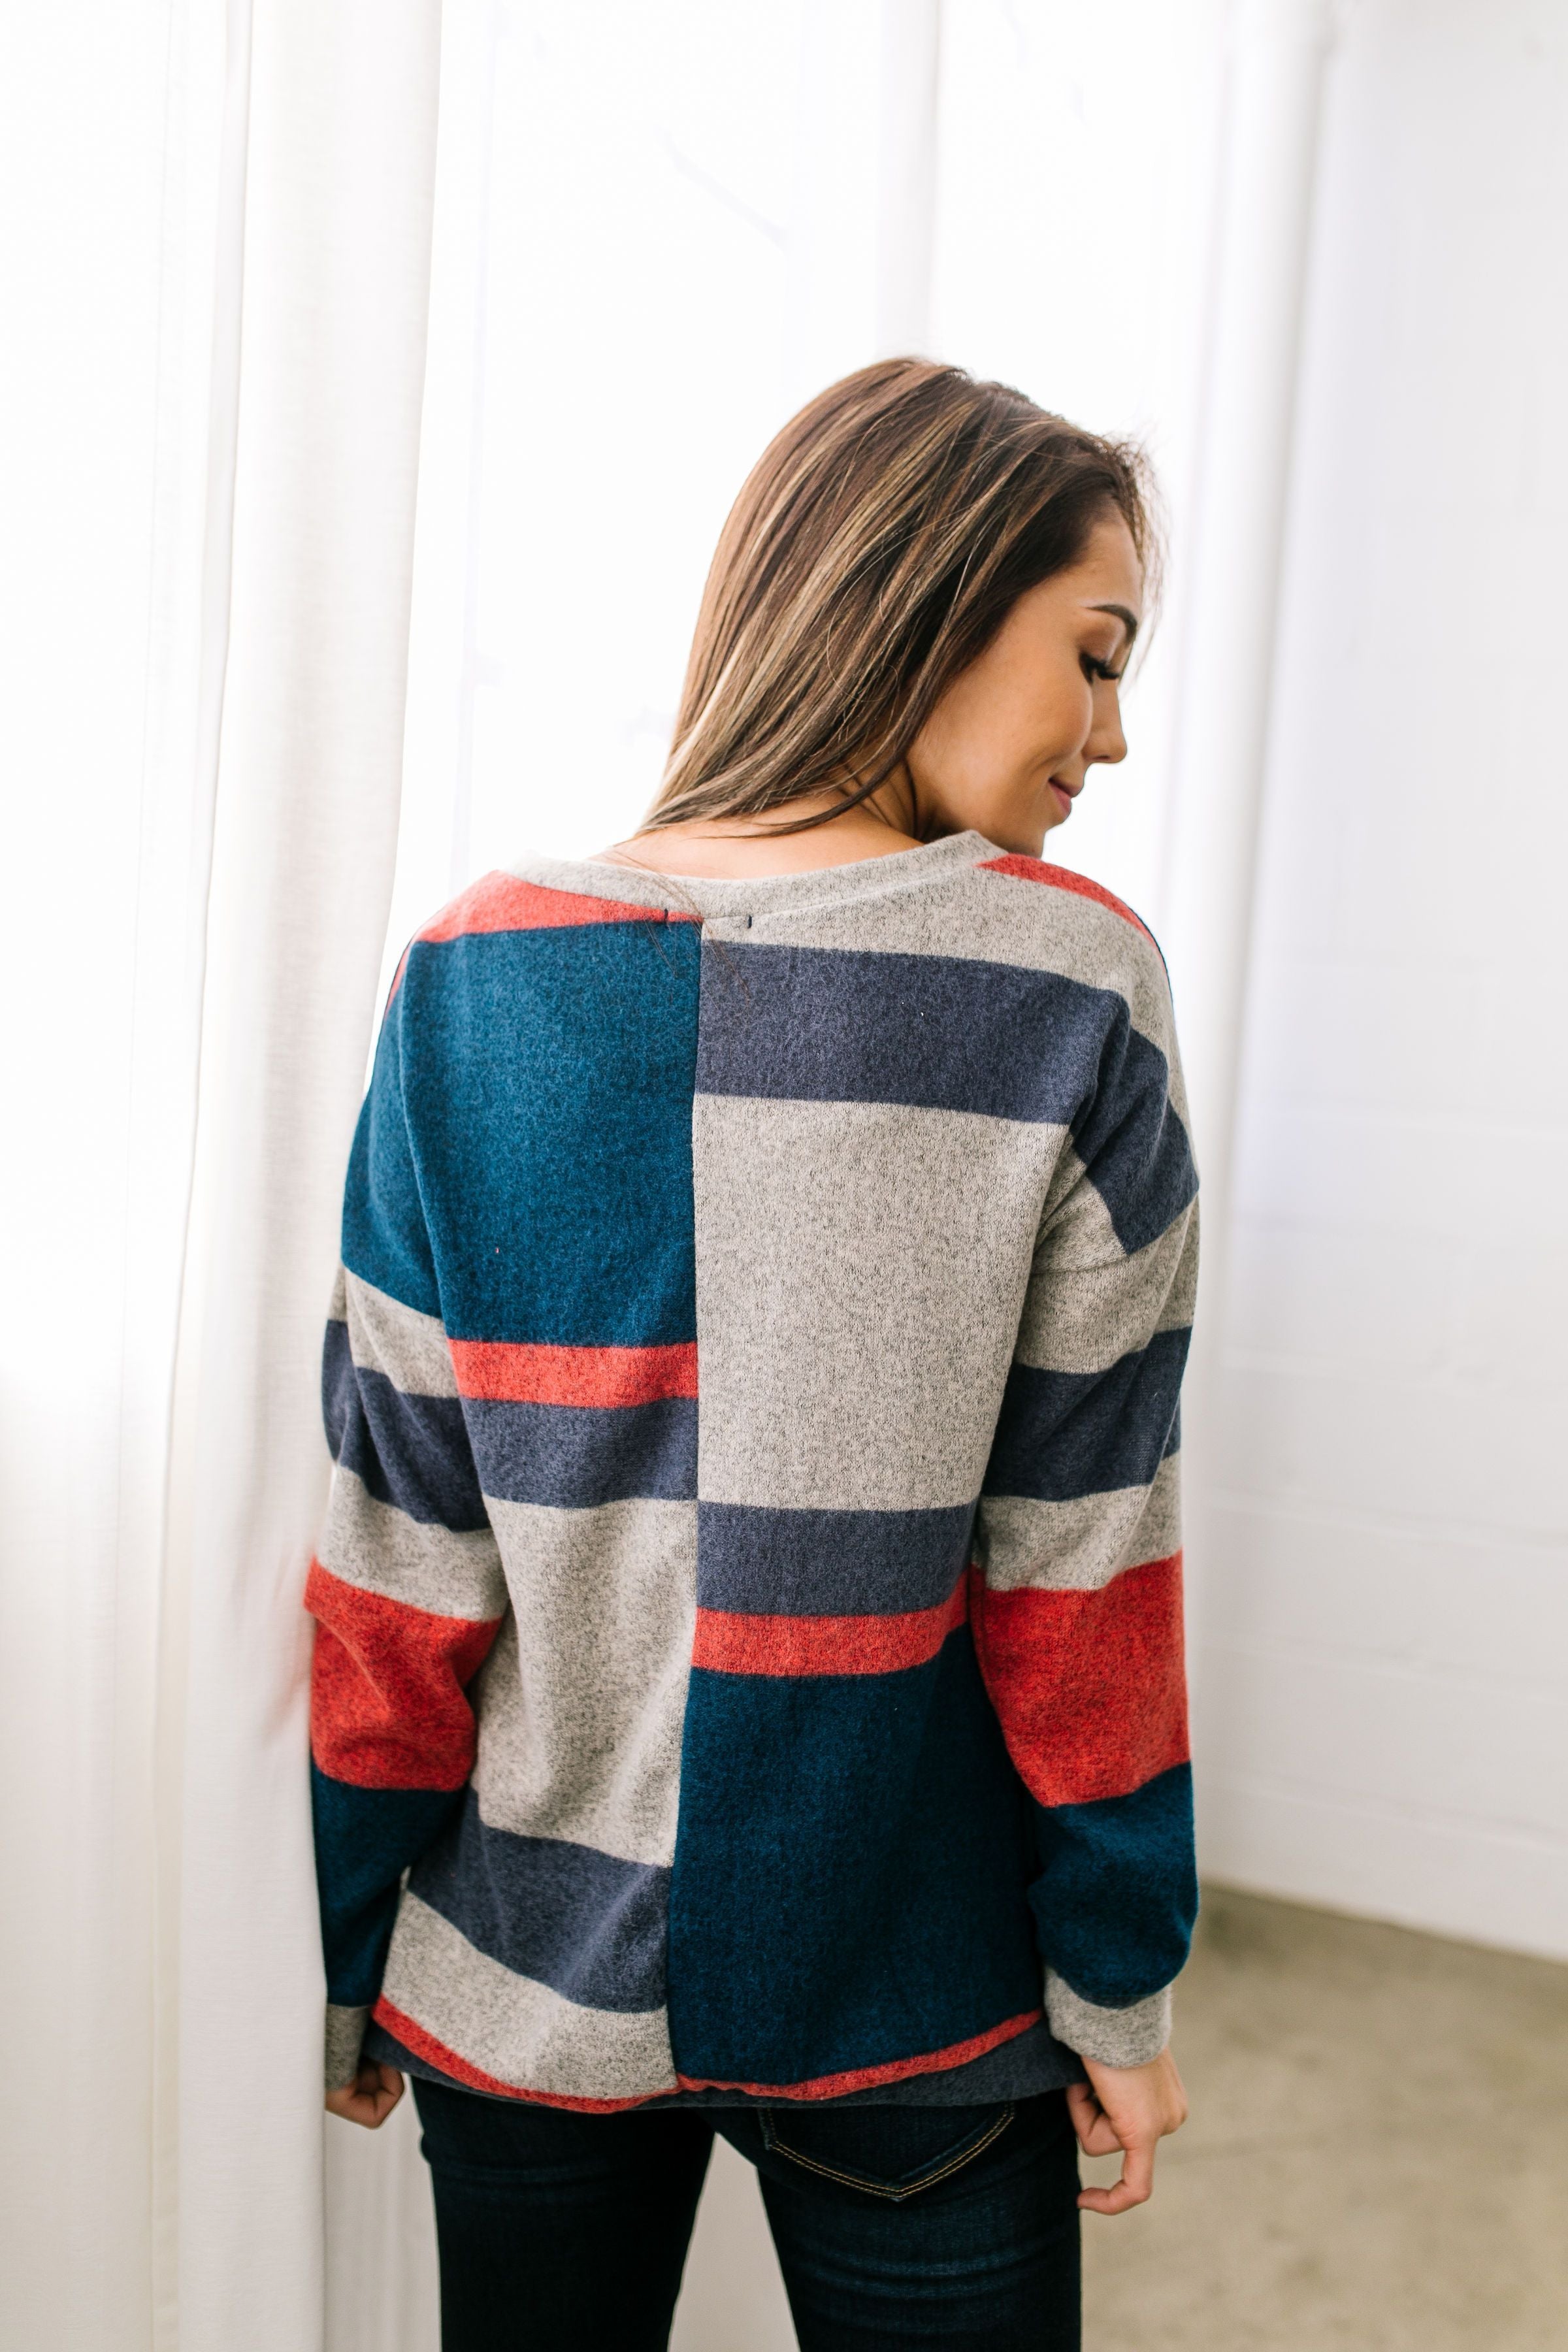 Keeping It Real Multi-Color Striped Top - ALL SALES FINAL